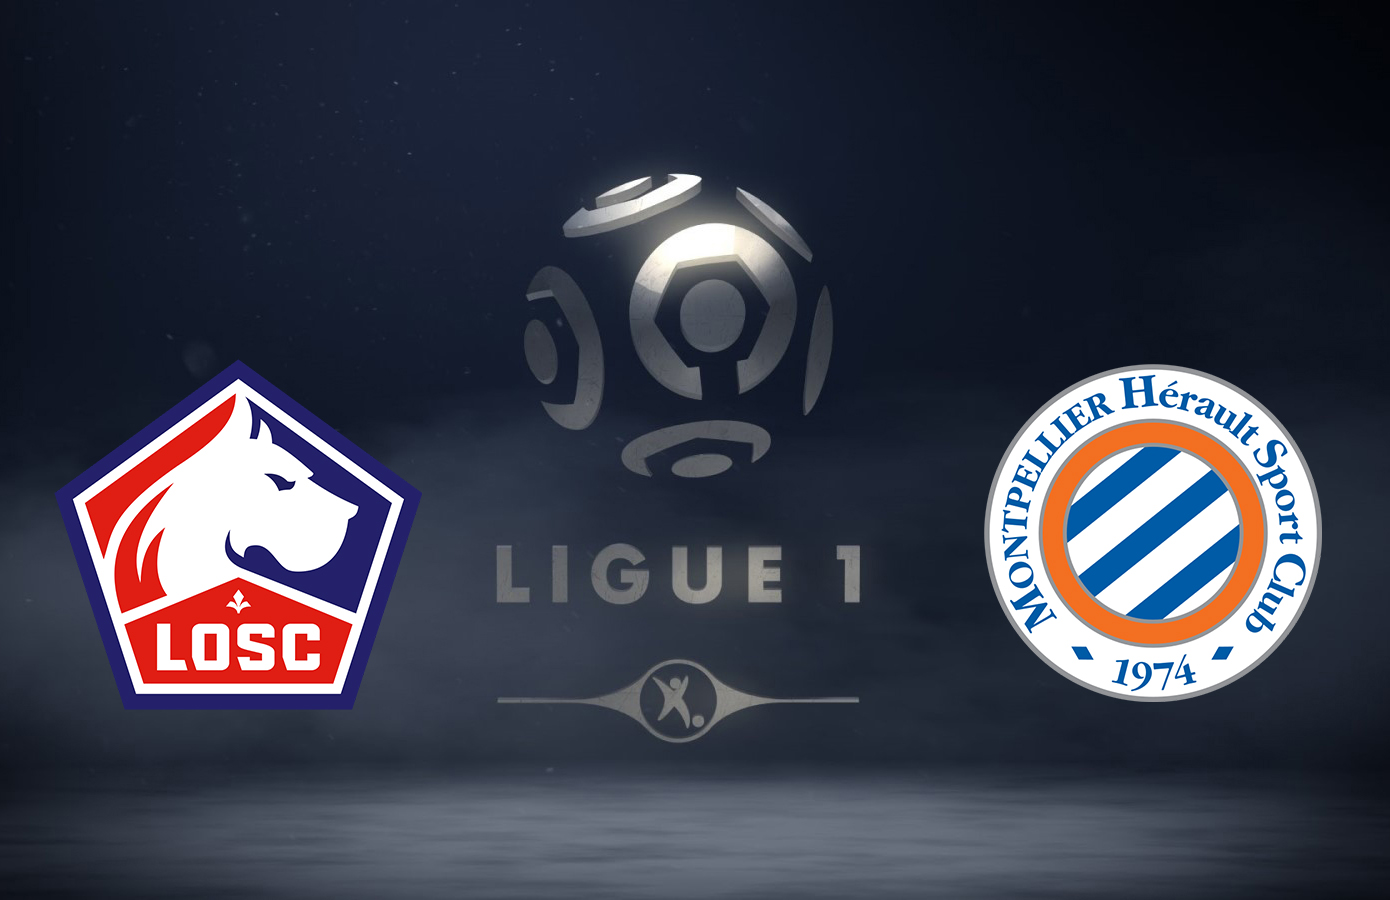 soi-keo-ca-cuoc-bong-da-ngay-10-12-Lille-vs-Montpellier-tiep-can-top-2-b9 1